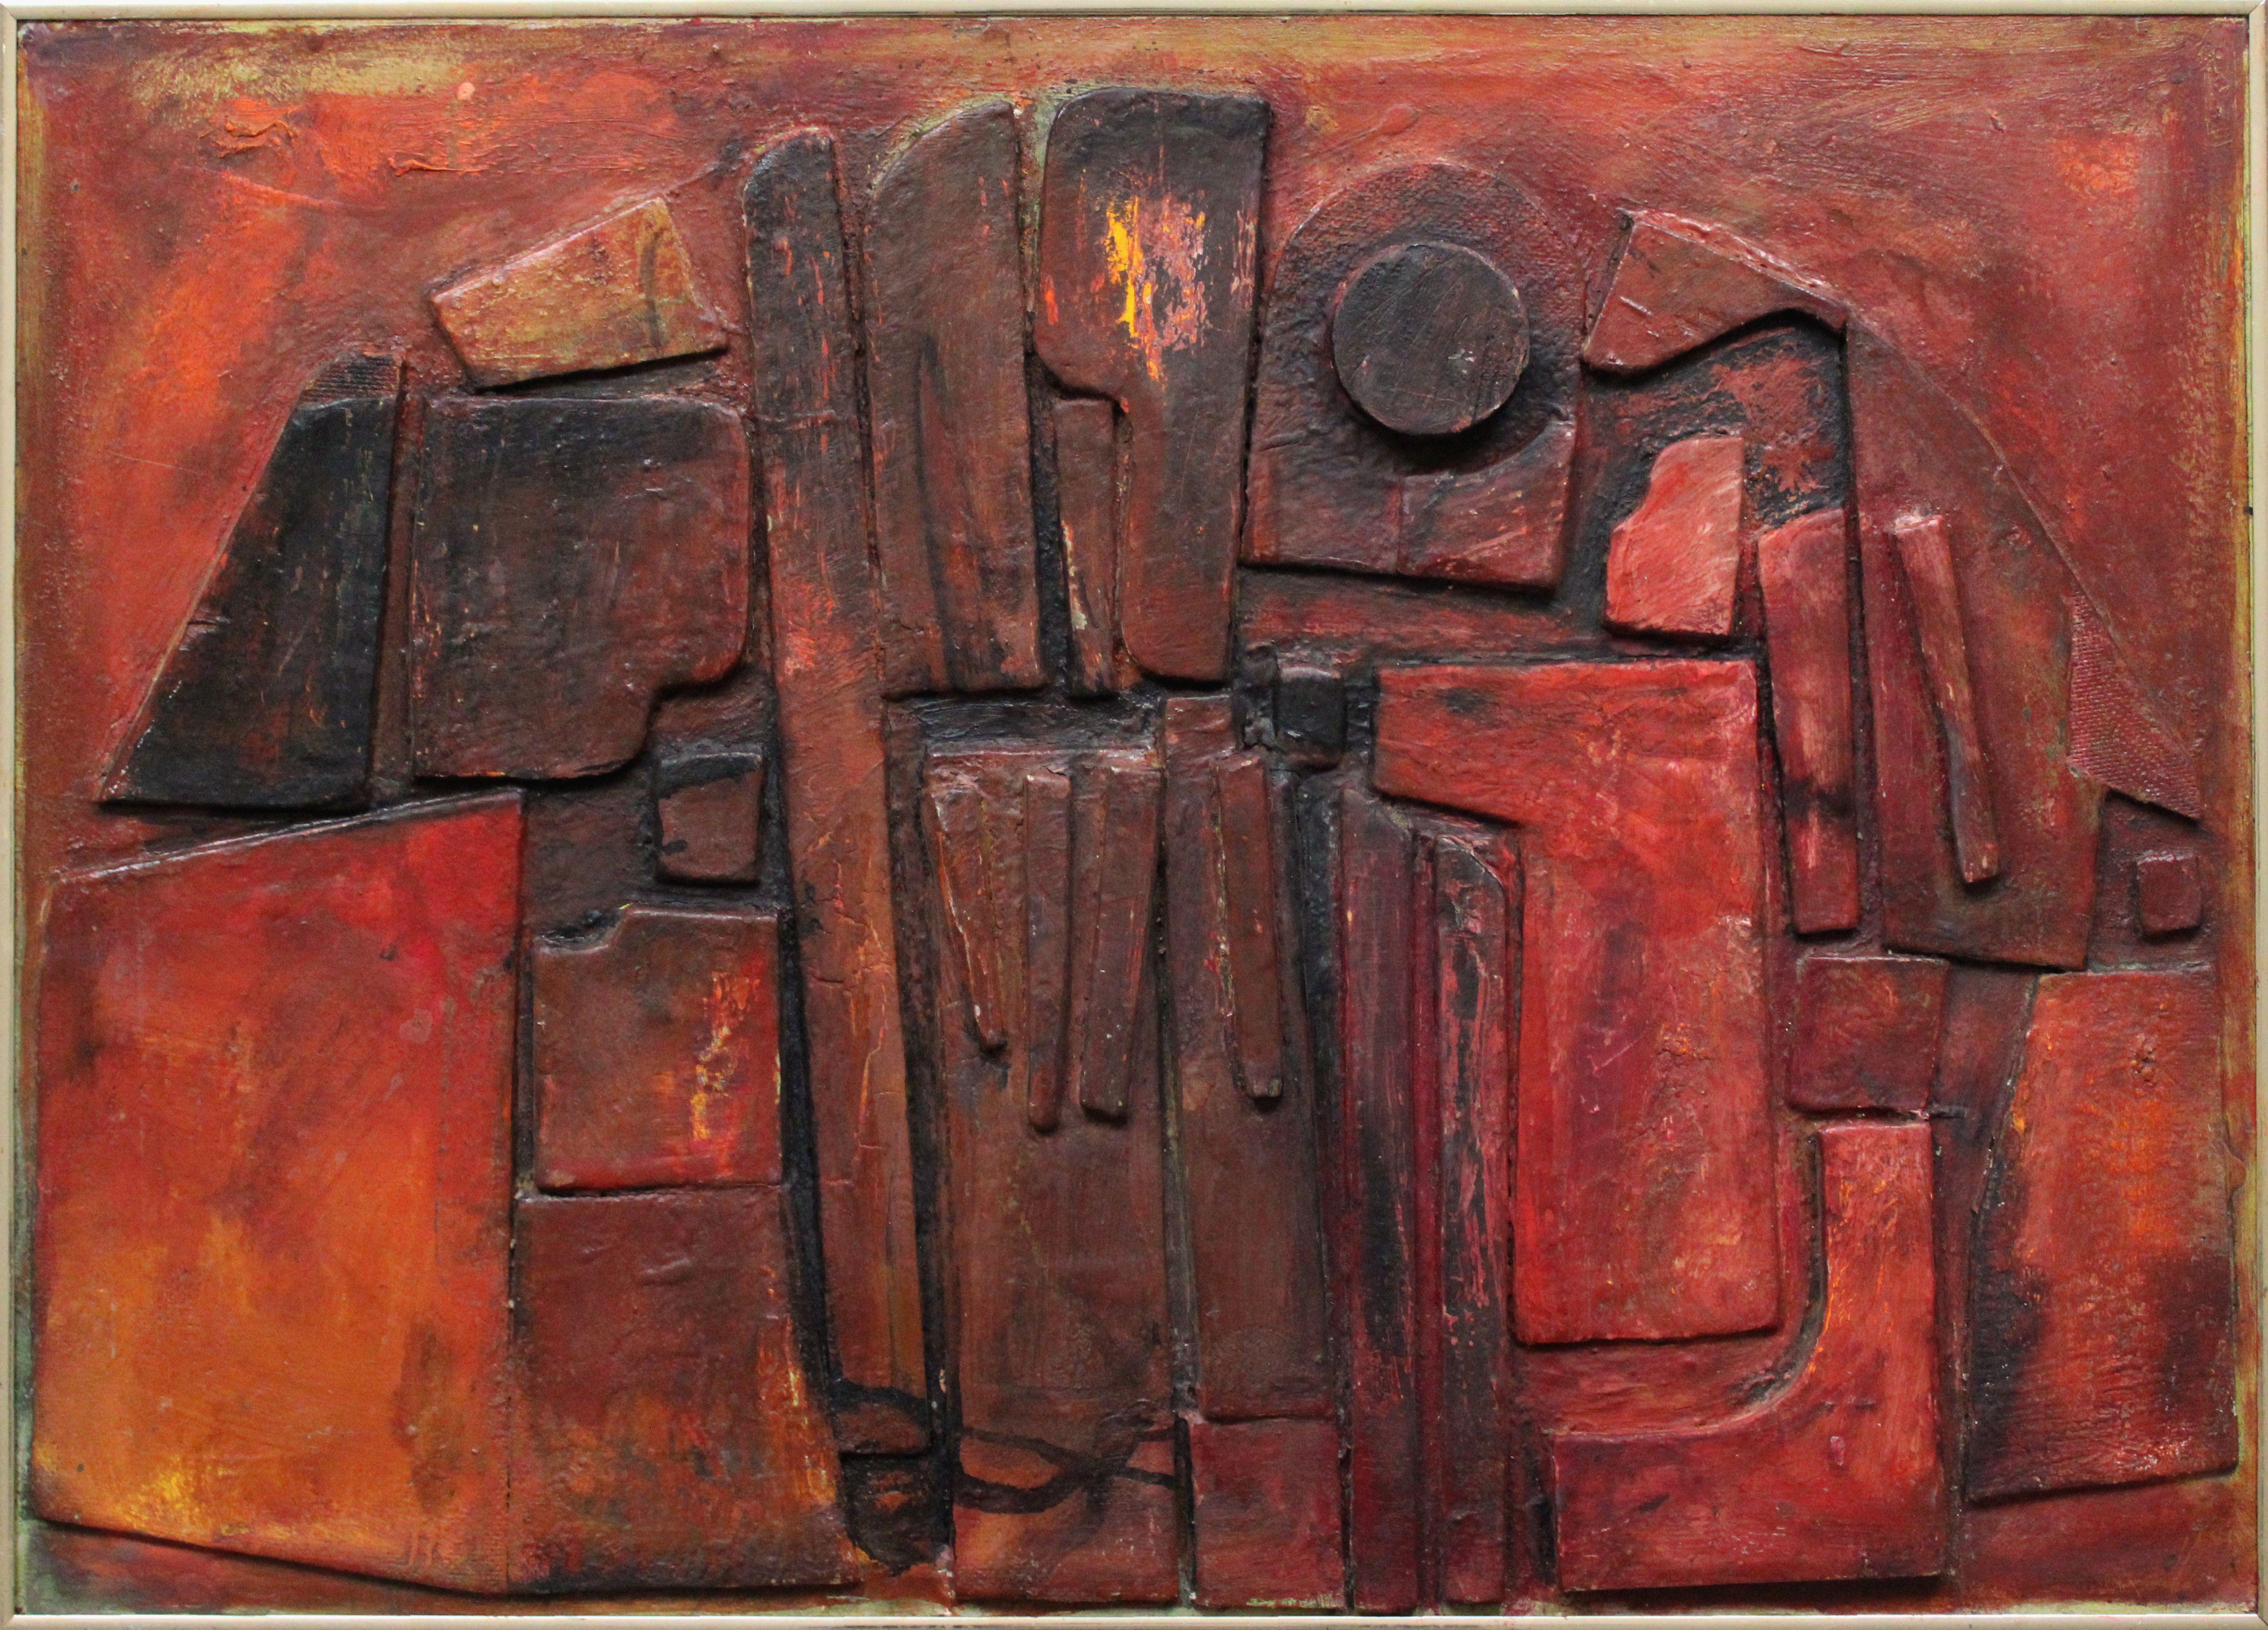 Georgs Barkans Abstract Painting - Dedication to Picasso. 1991, assemblage, cardboard, wood, acrylic, 49, 5x59, 5cm